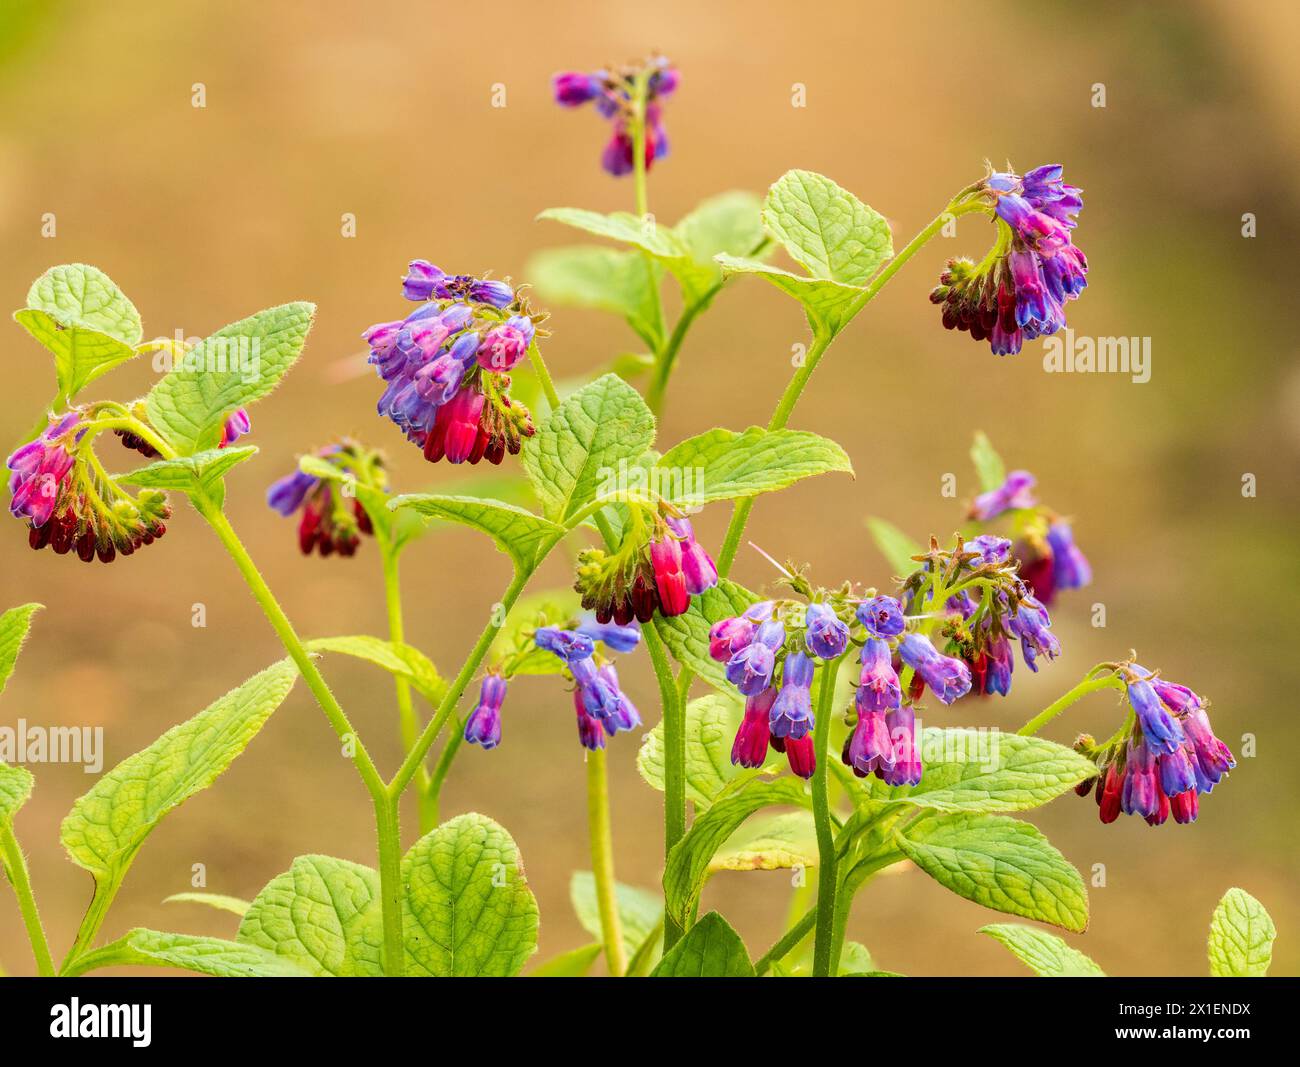 Red pink aging to blue flowers of the spring to early summer blooming comfrey variety, Symphytum 'Angela Whinfield' Stock Photo